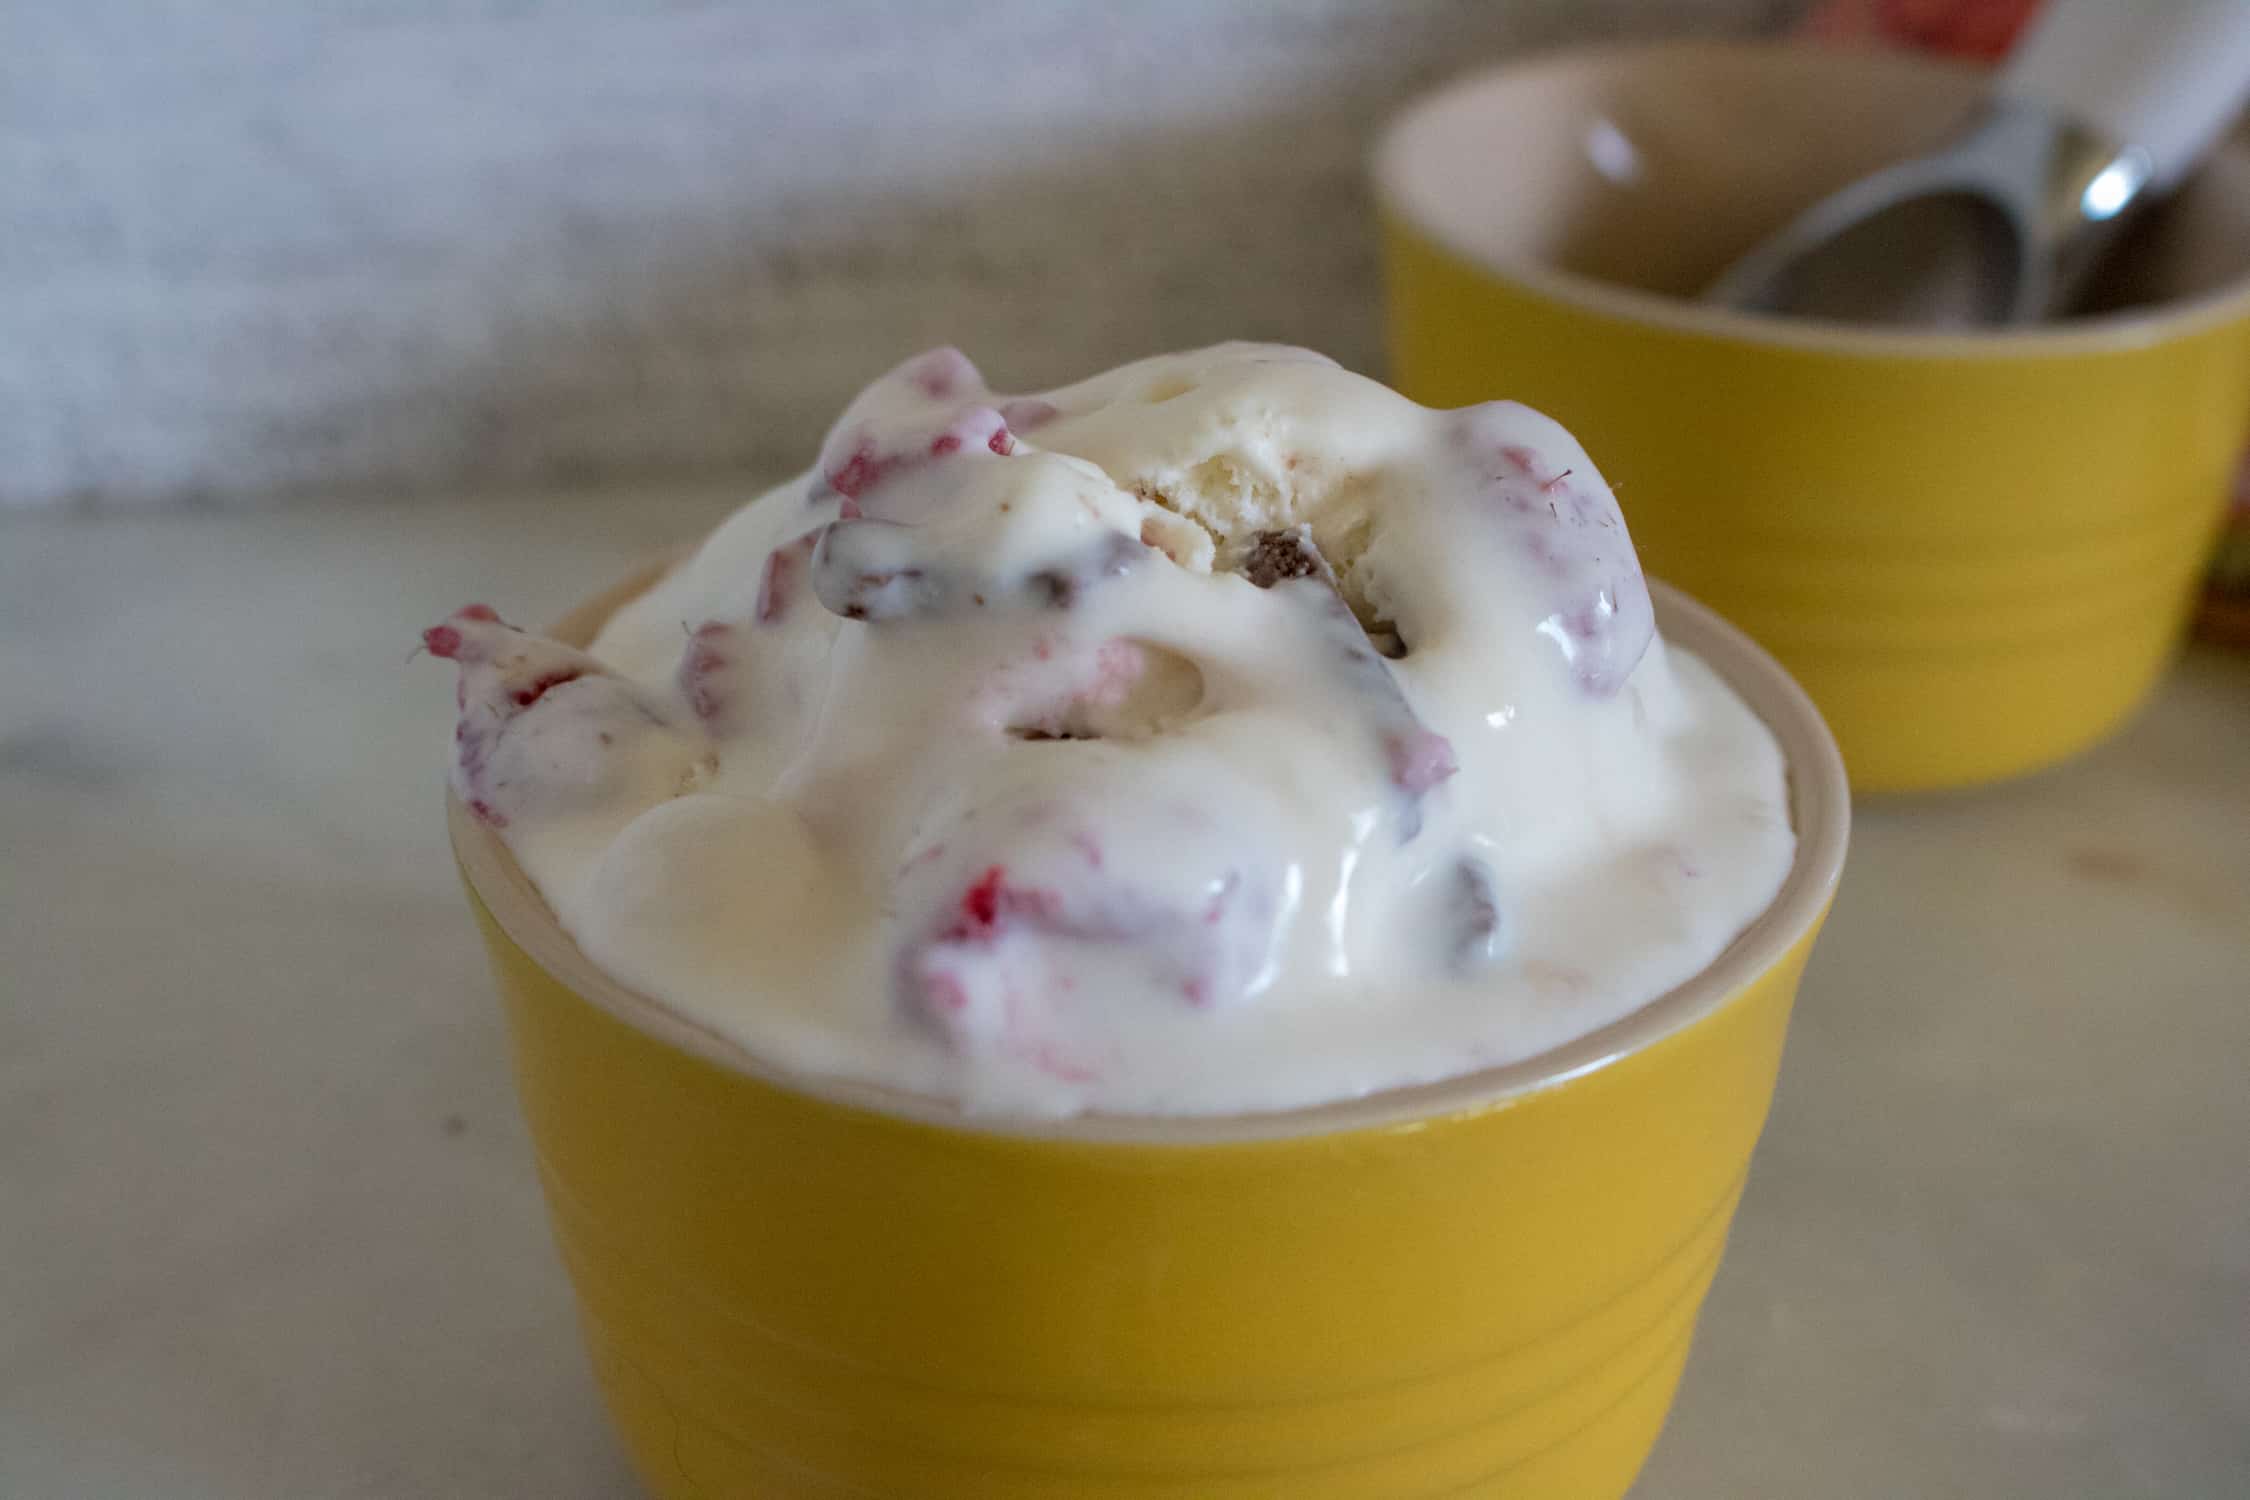 one scoop of Raspberry Chocolate Chunk No-Churn Ice Cream served in a yellow bowl with another yellow bowl in background with silver scoop in it